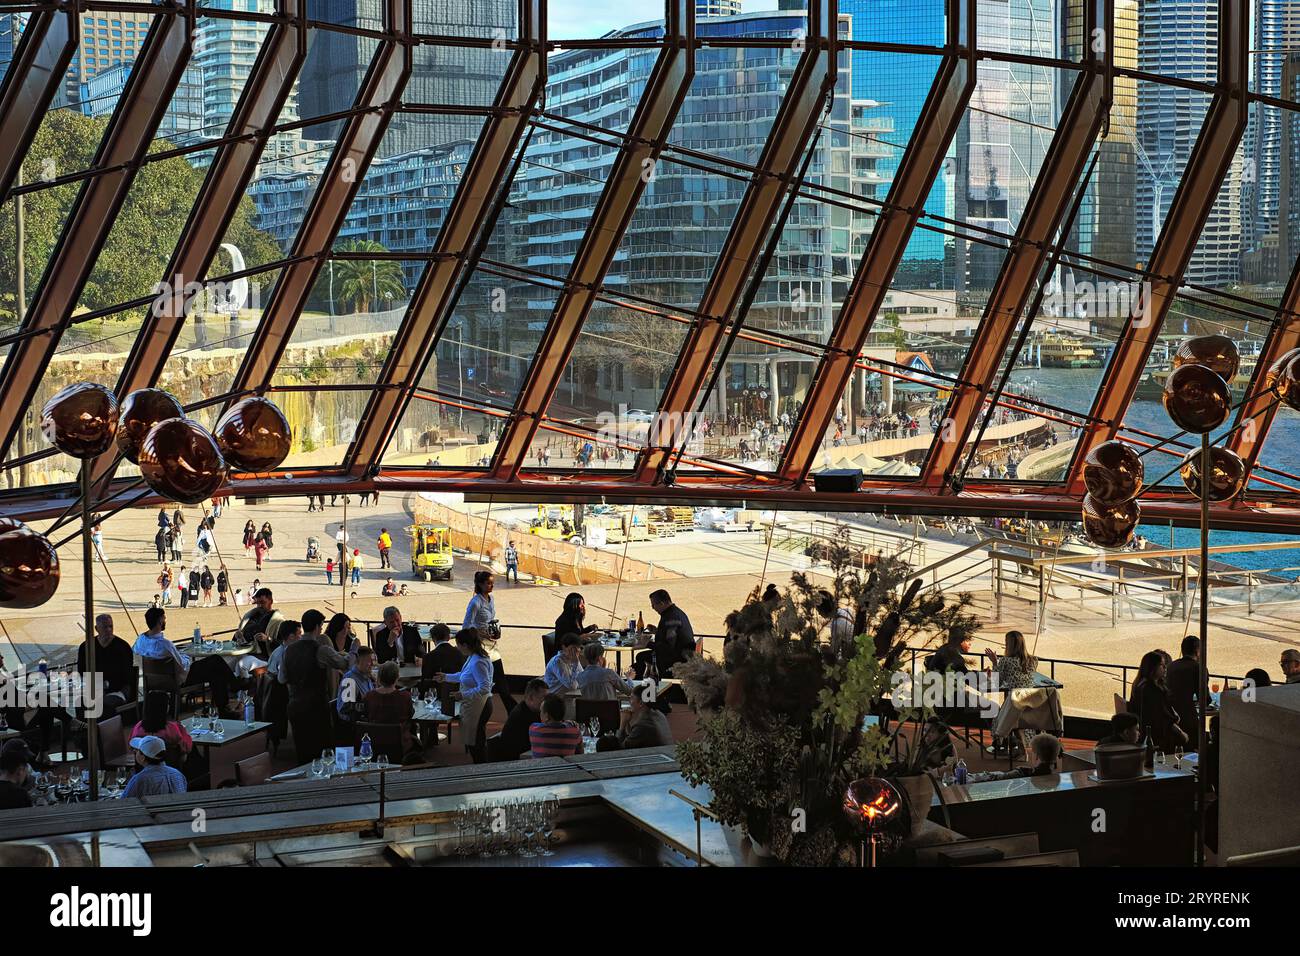 Sydney Opera House Interior at Bennelong Restaurant looking across the restaurant out to the forecourt, Circular Quay and Sydney CBD Stock Photo